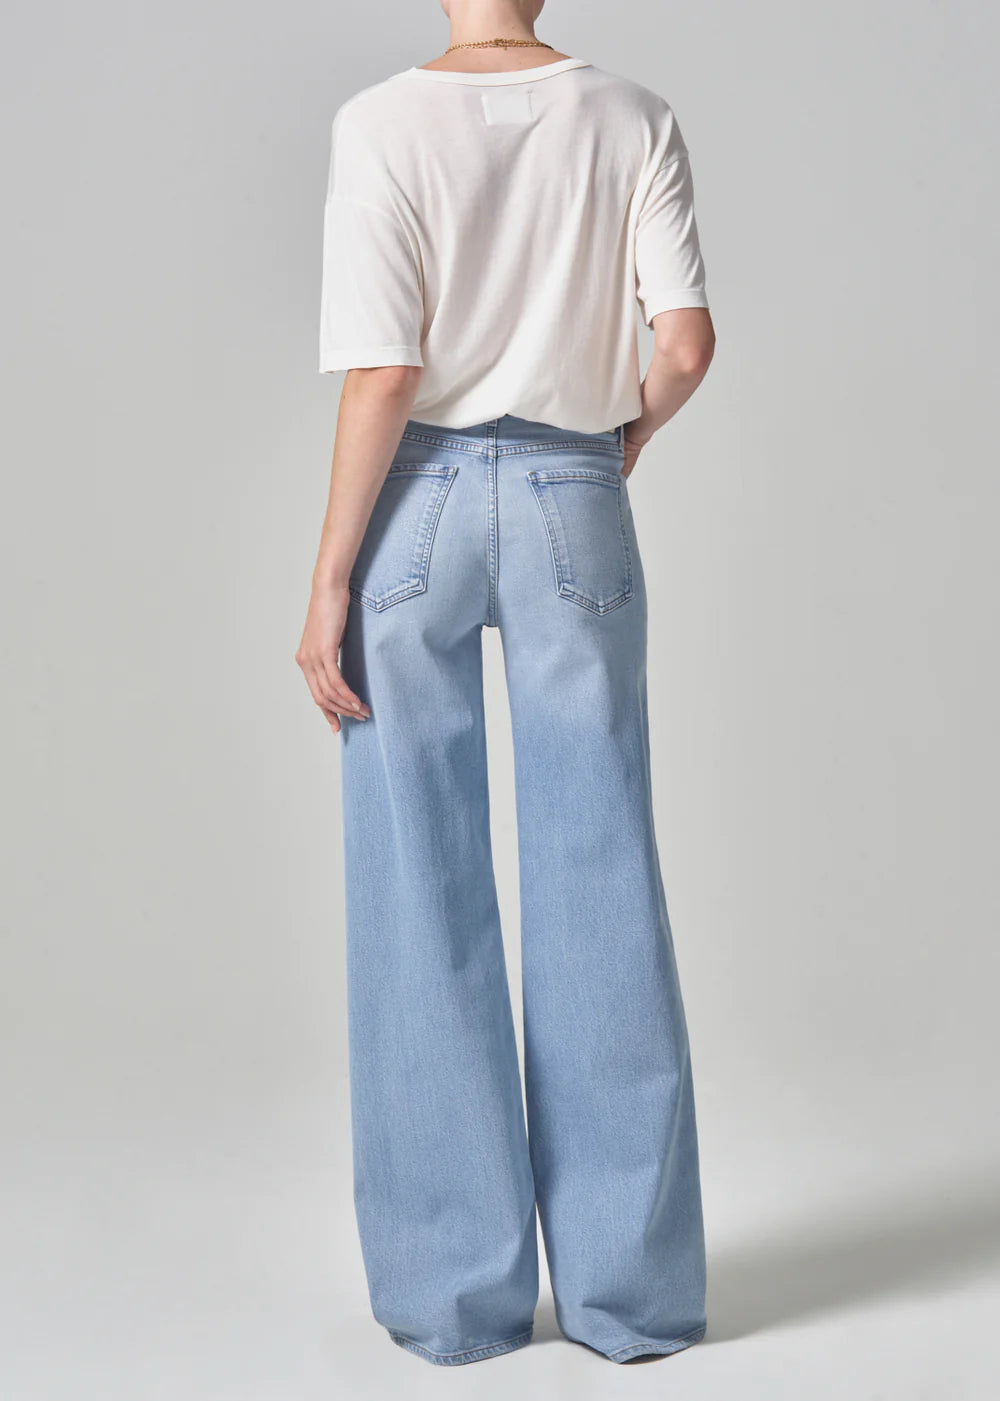 Citizens of Humanity - Loli Mid Rise Baggy in Neroli